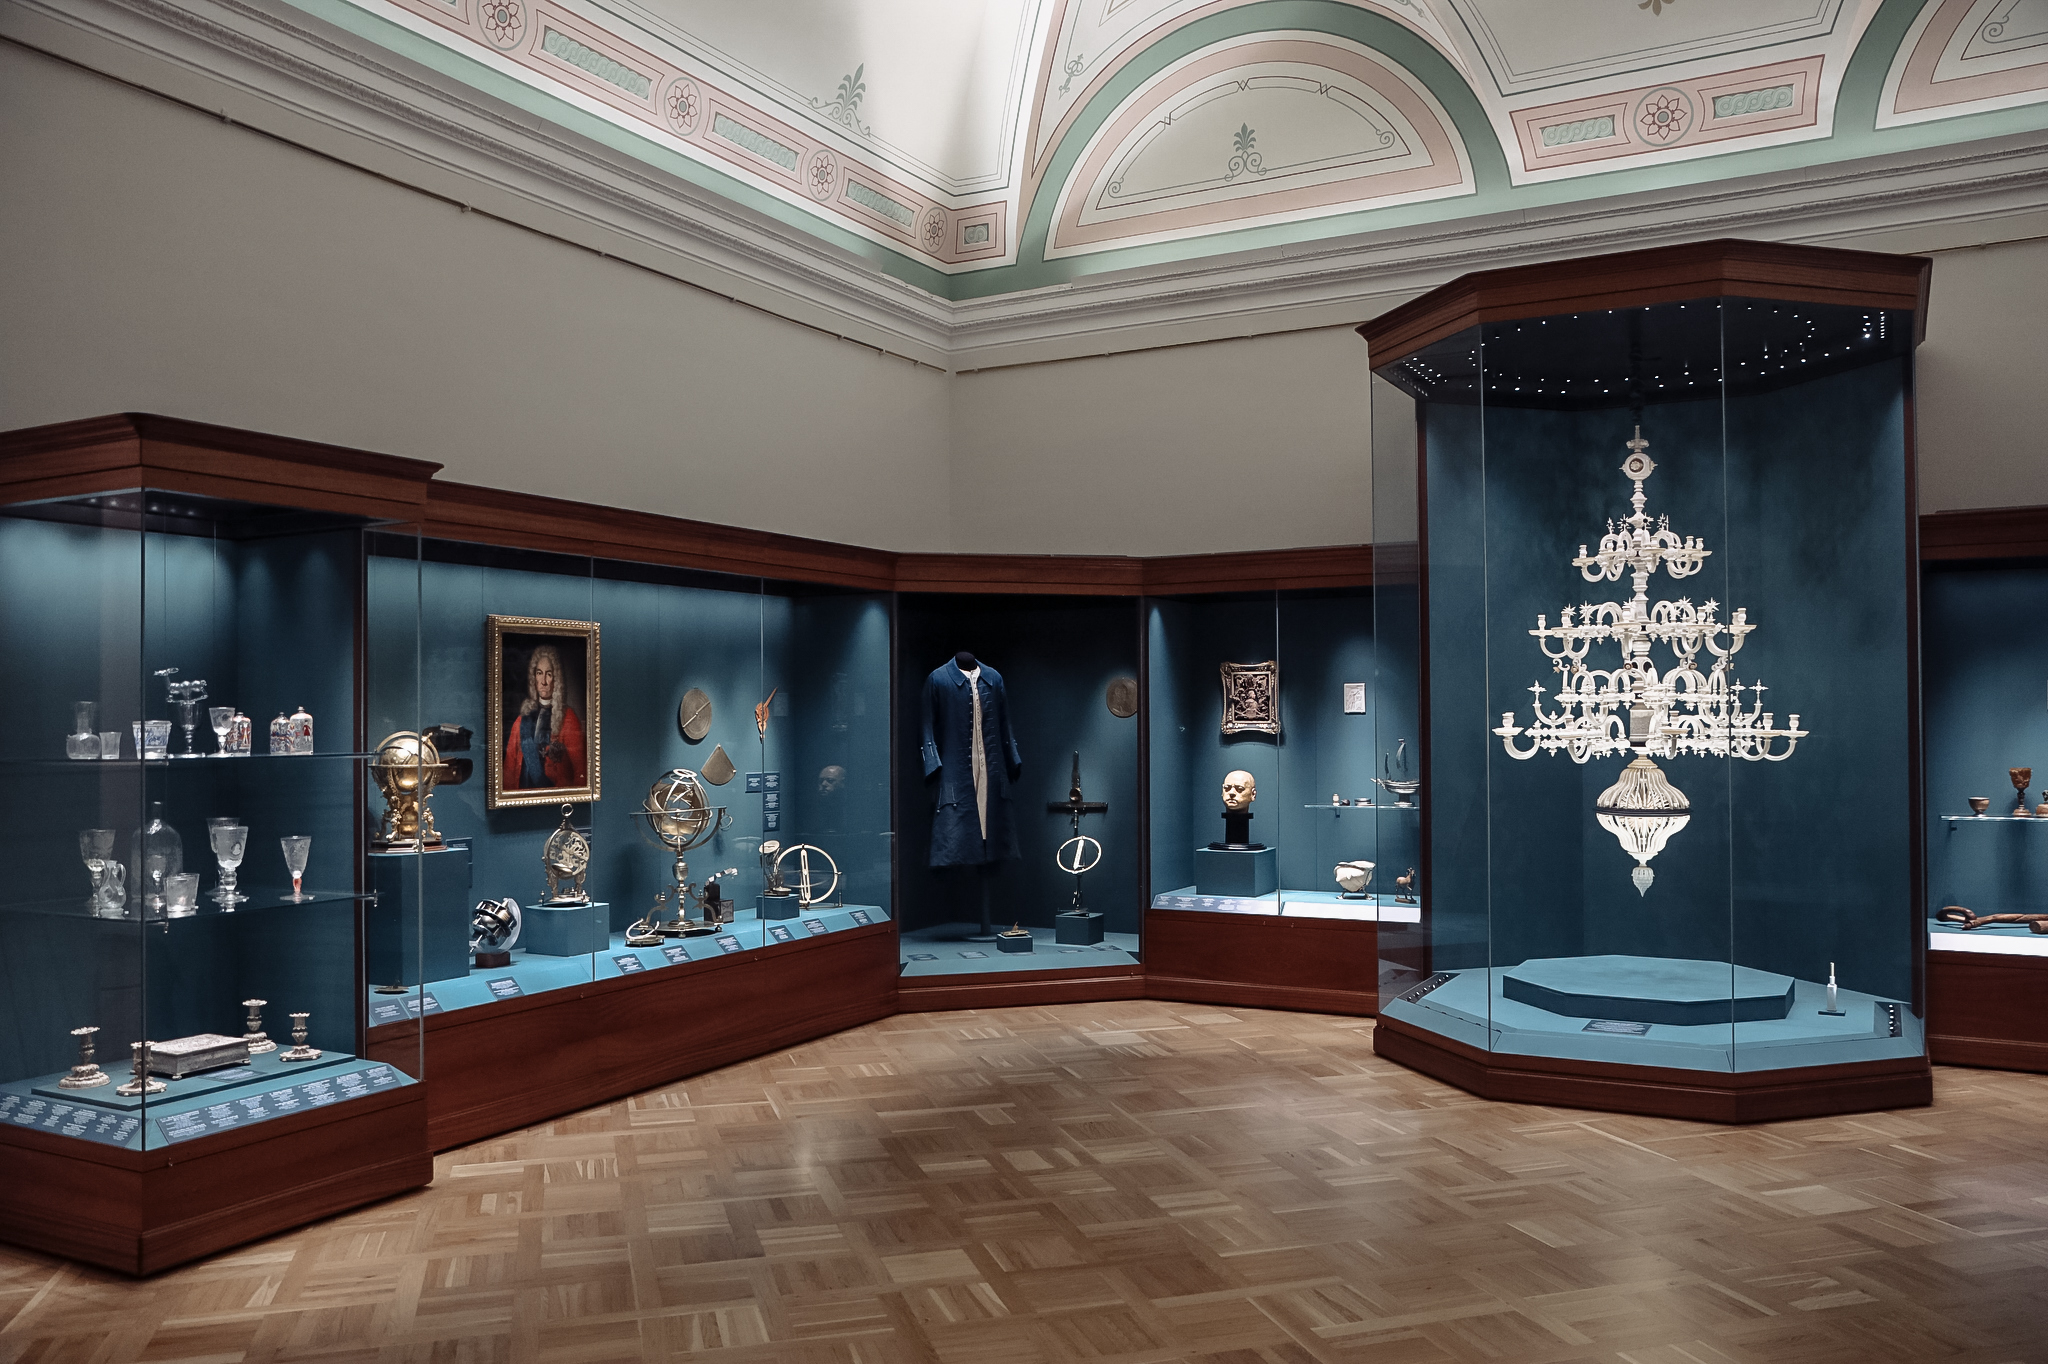 Permanent exhibition on Peter I era opens at Hermitage Museum with support from Gazprom